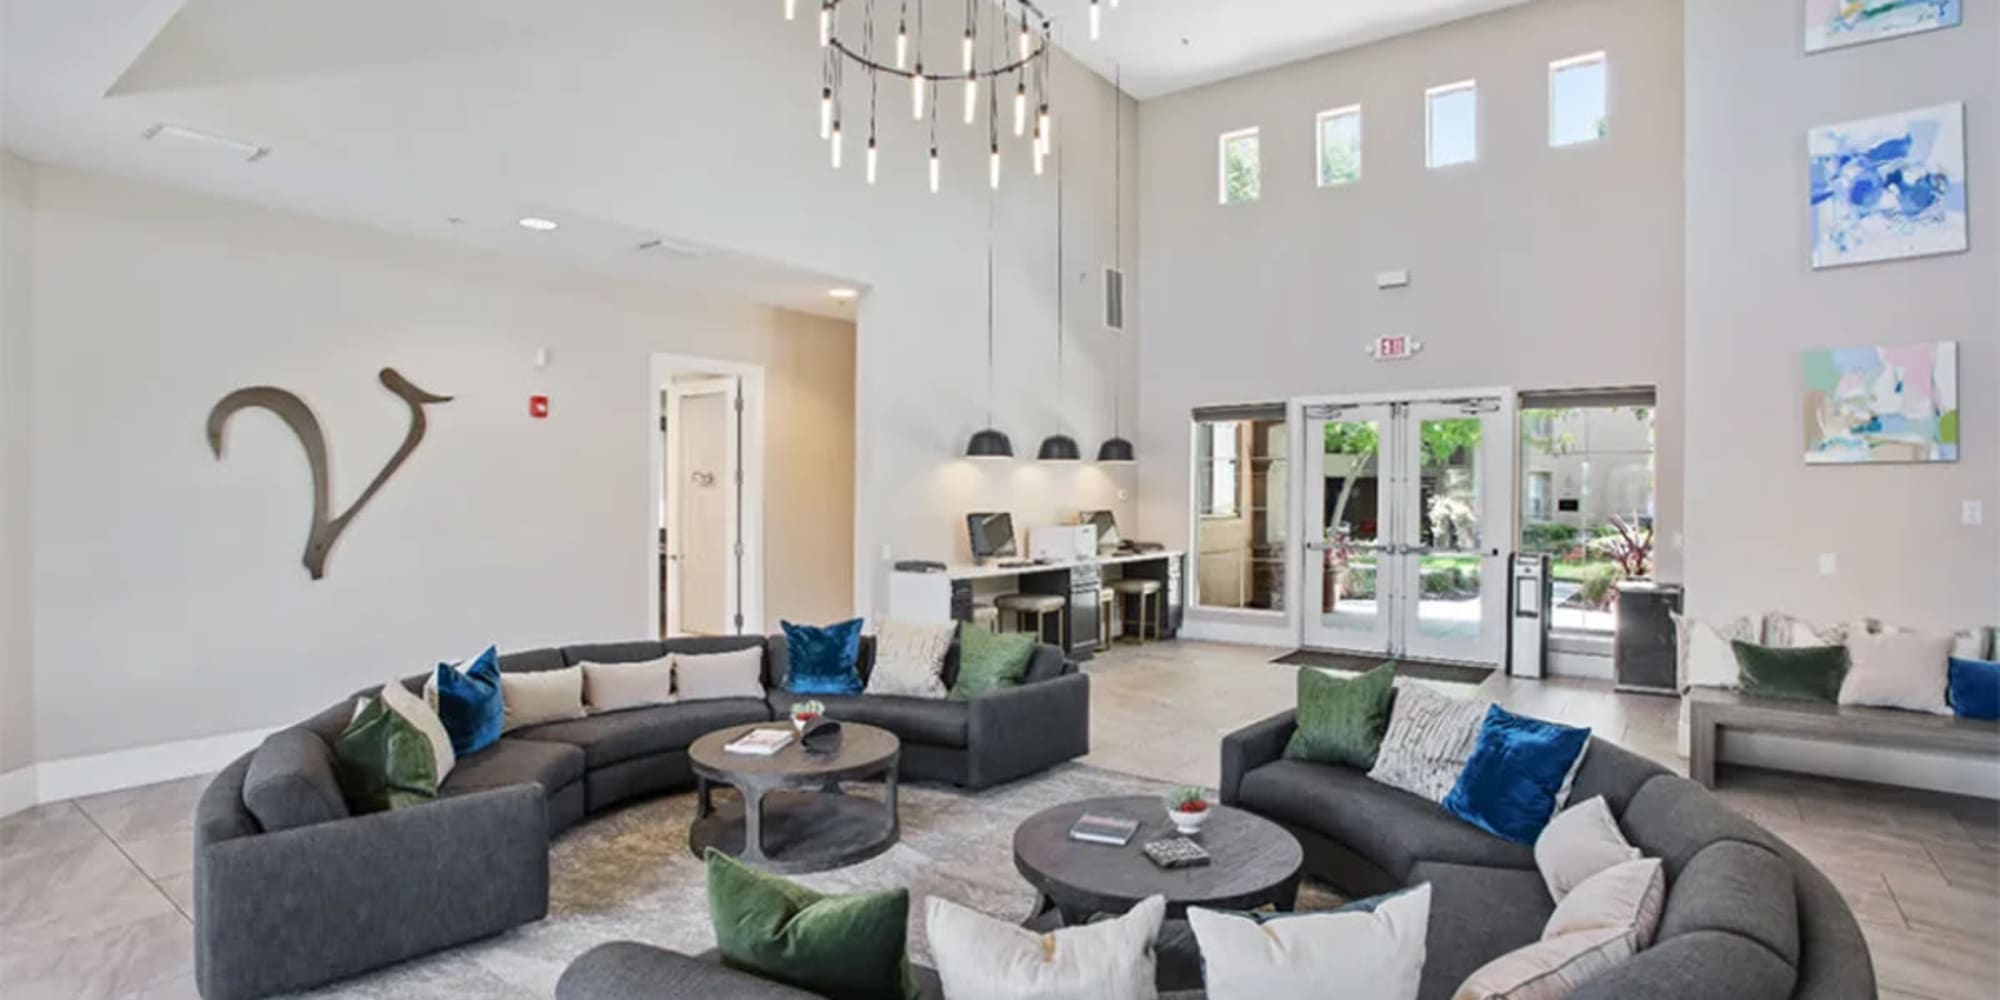 Lounge area with oversized sofas and cathedral ceilings in the clubhouse at Villagio Luxury Apartments in Sacramento, California